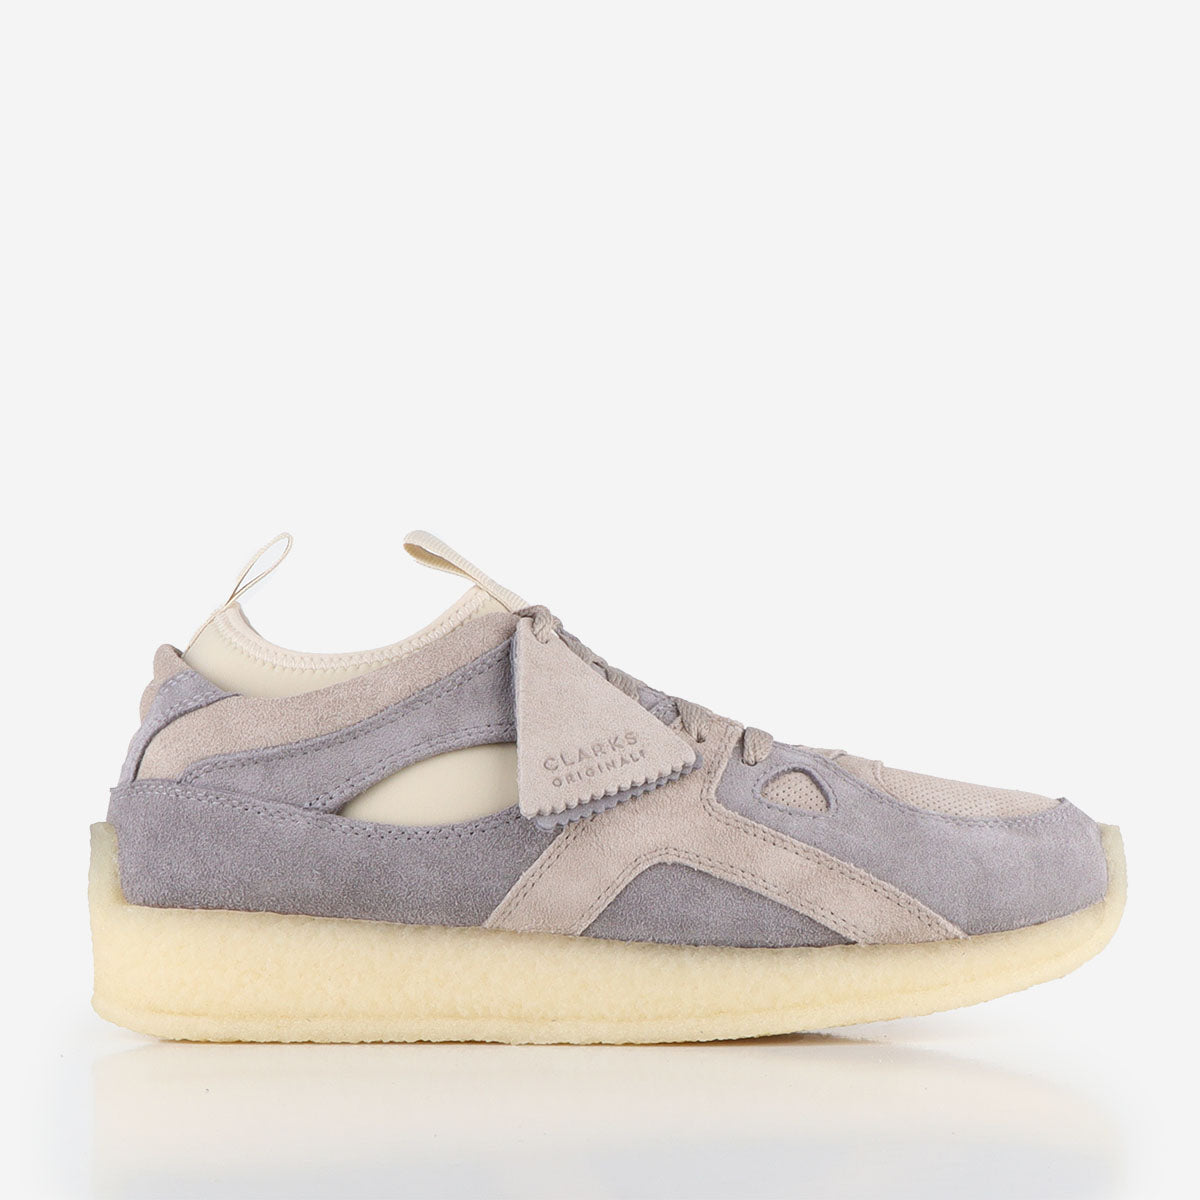 Clarks Originals 8th Street By Ronnie Fieg Breacon Shoes